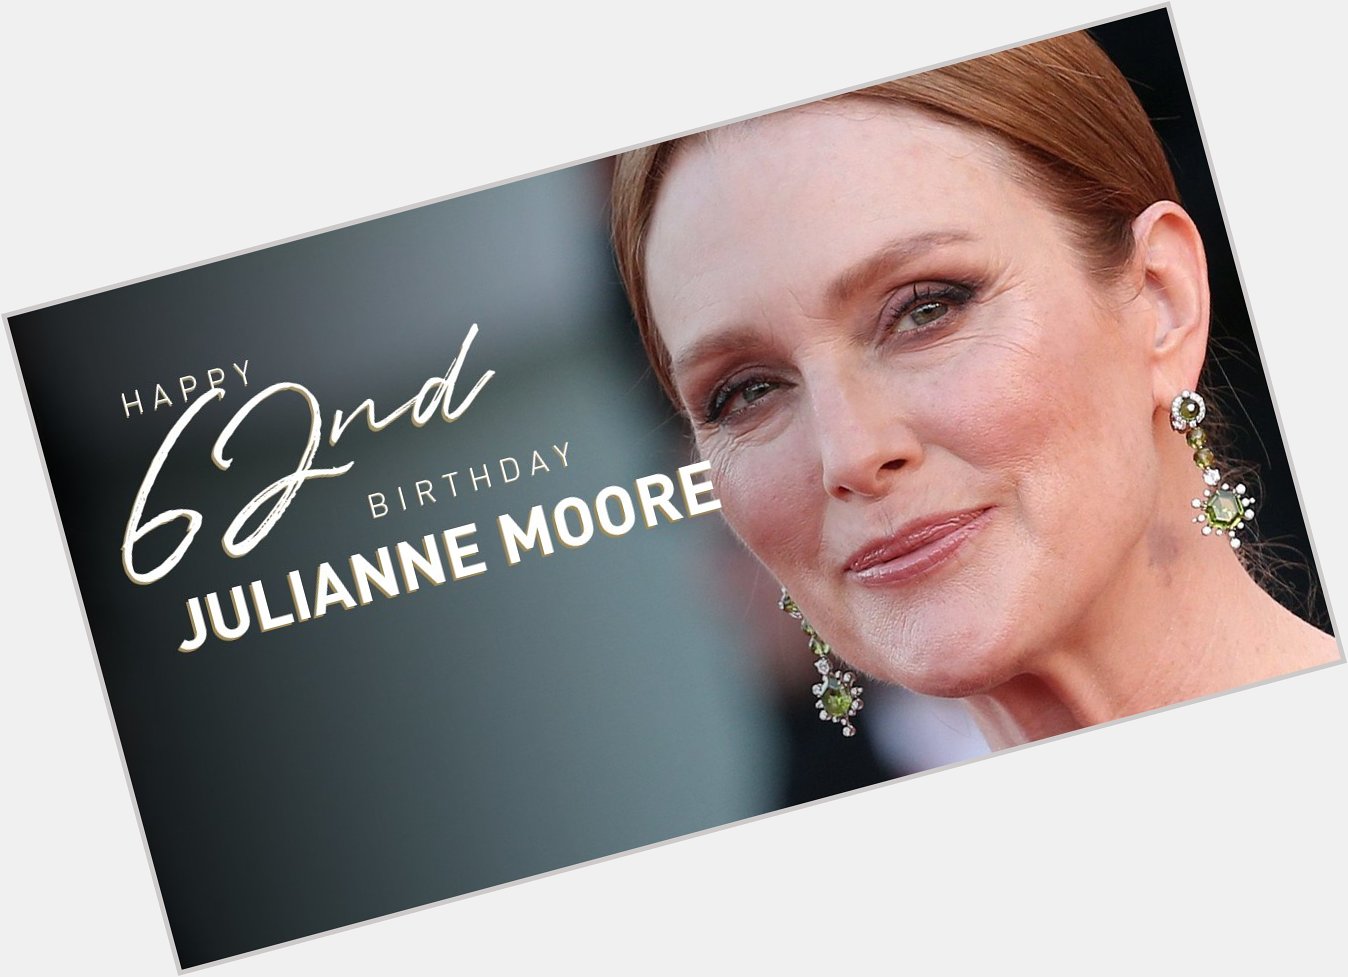 Happy 62nd birthday to the fantastic Actress Julianne Moore!

Read her bio here:  